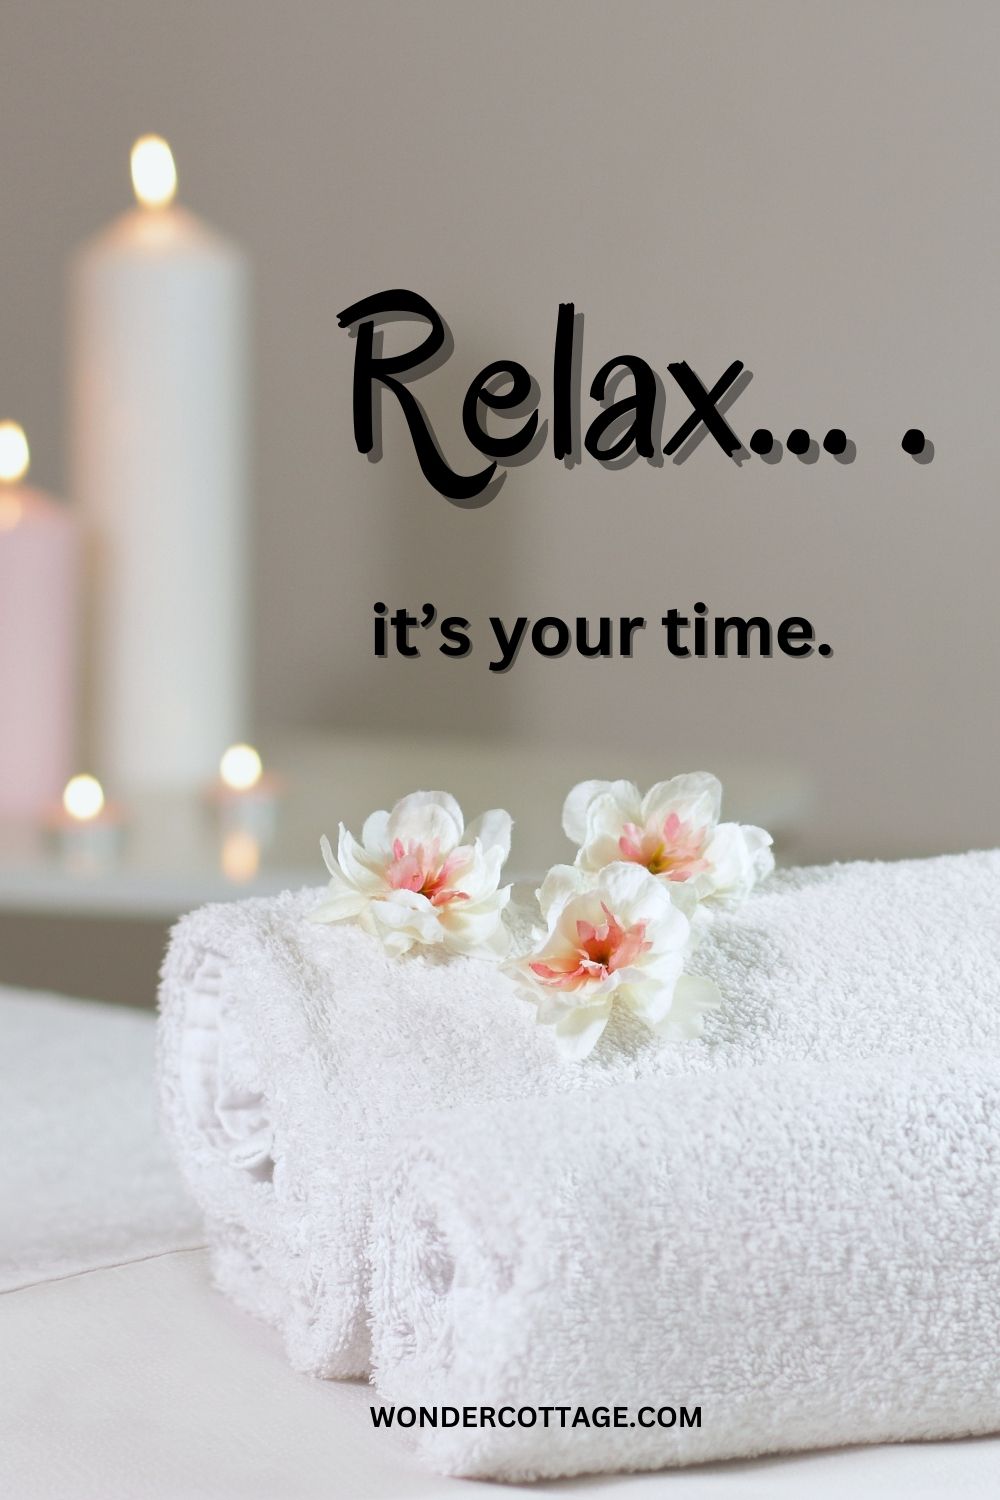 Relax… it’s your time.